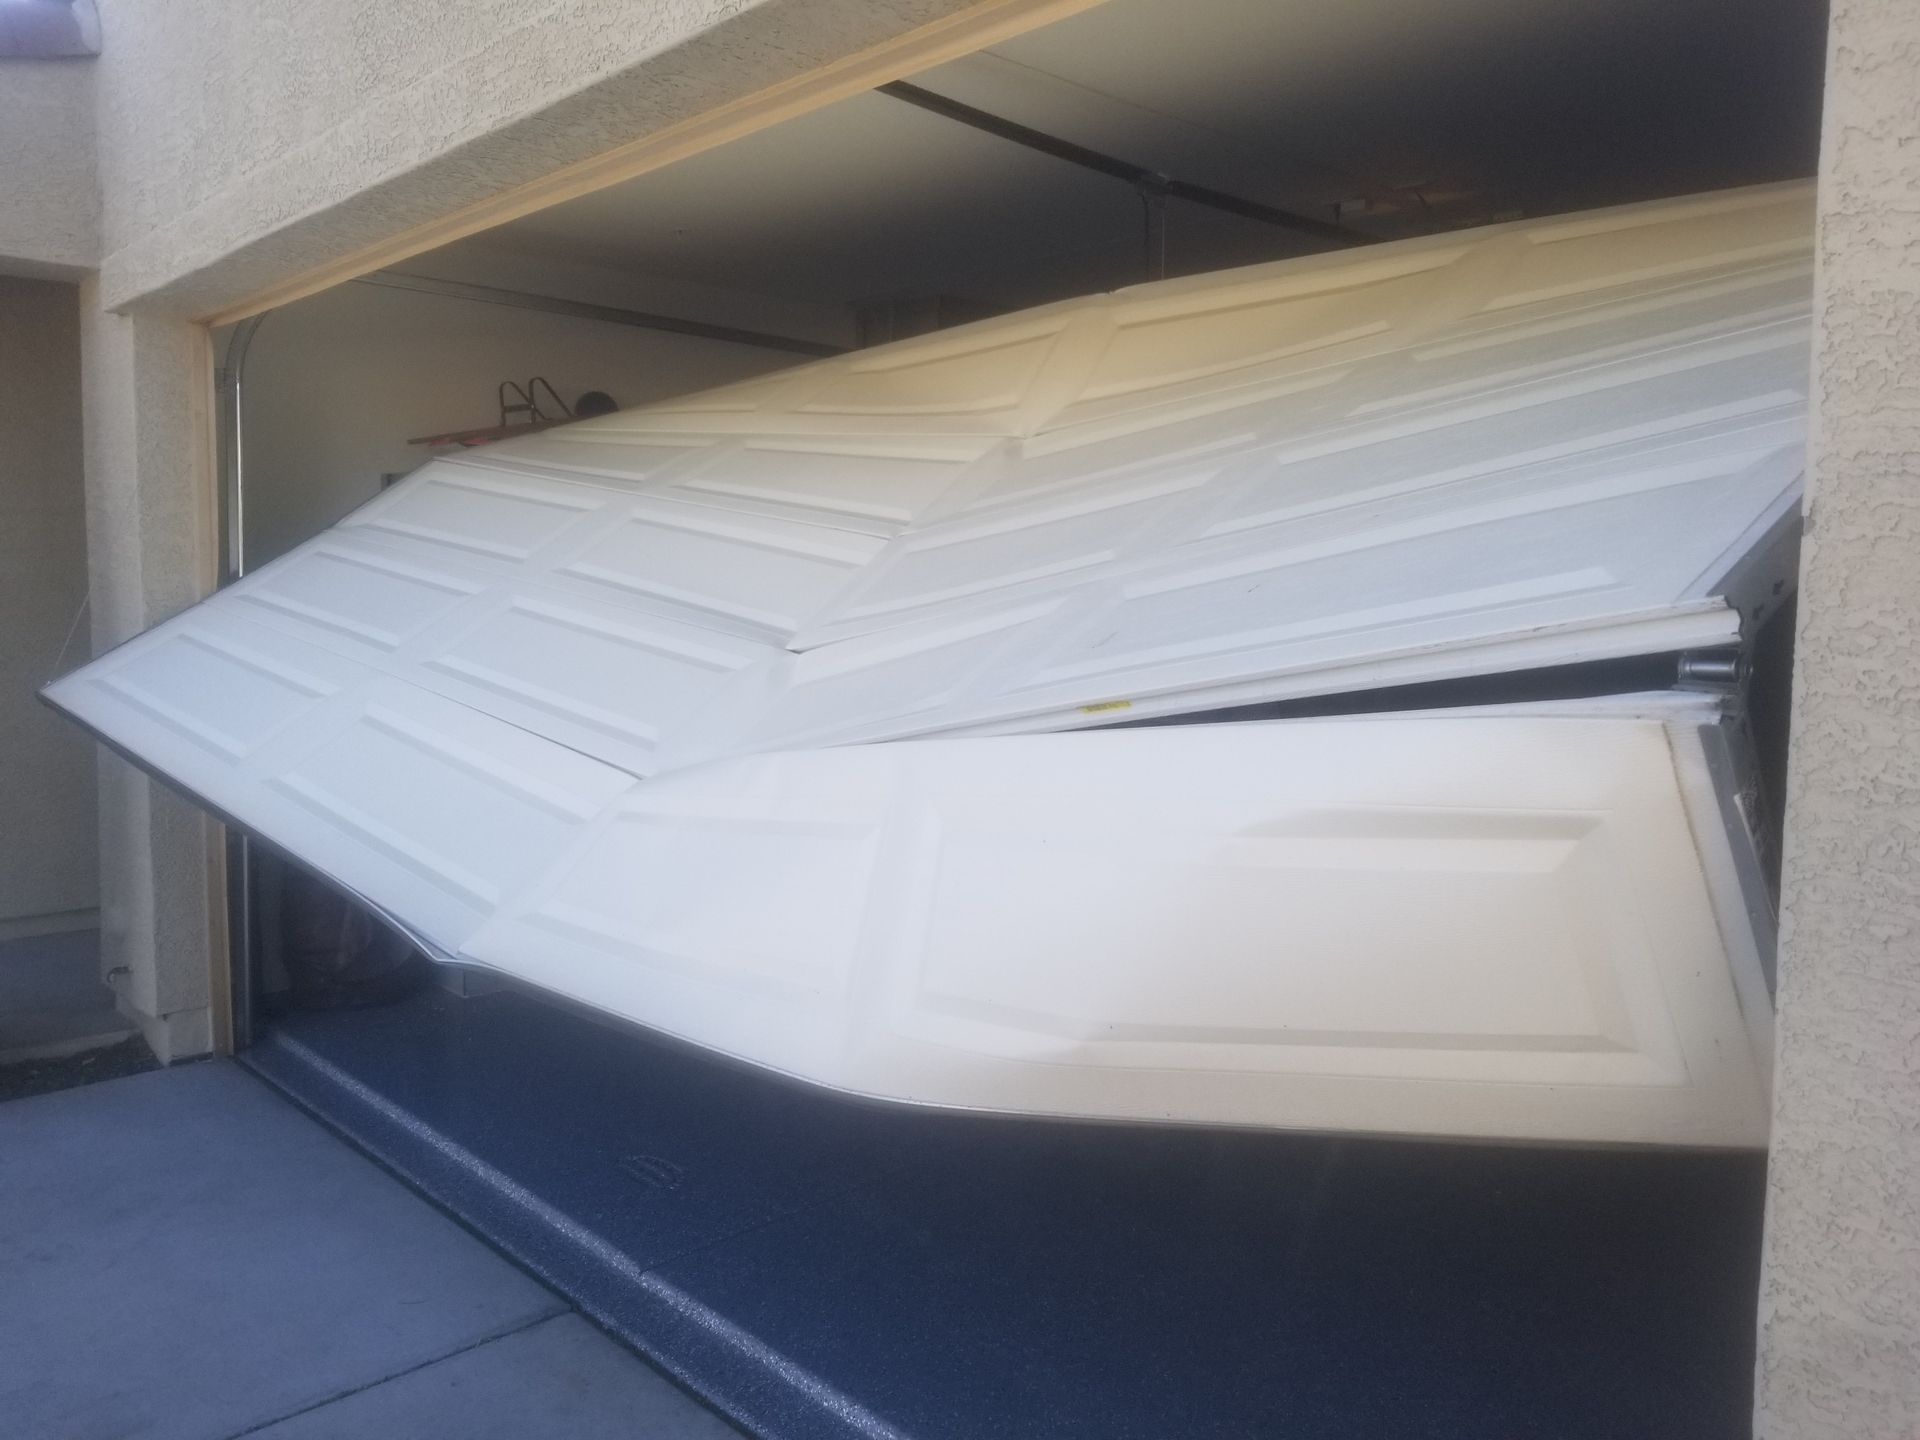 Before and after images of Avondale garage door repair showcasing quality workmanship.